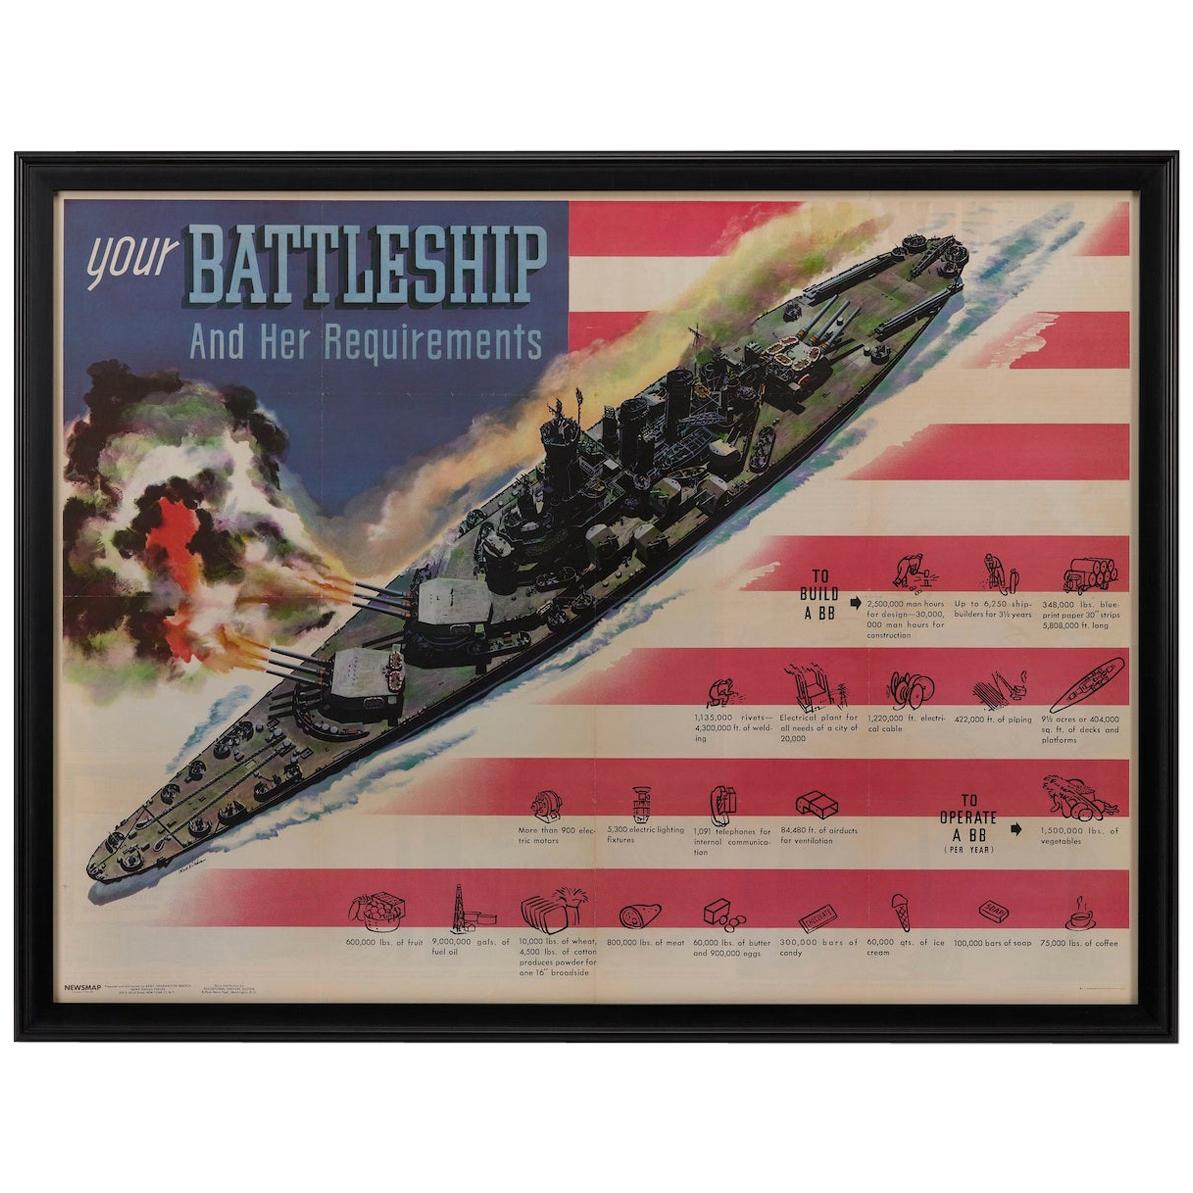 WWII Vintage Poster, "Your Battleship and Her Requirements" 1944